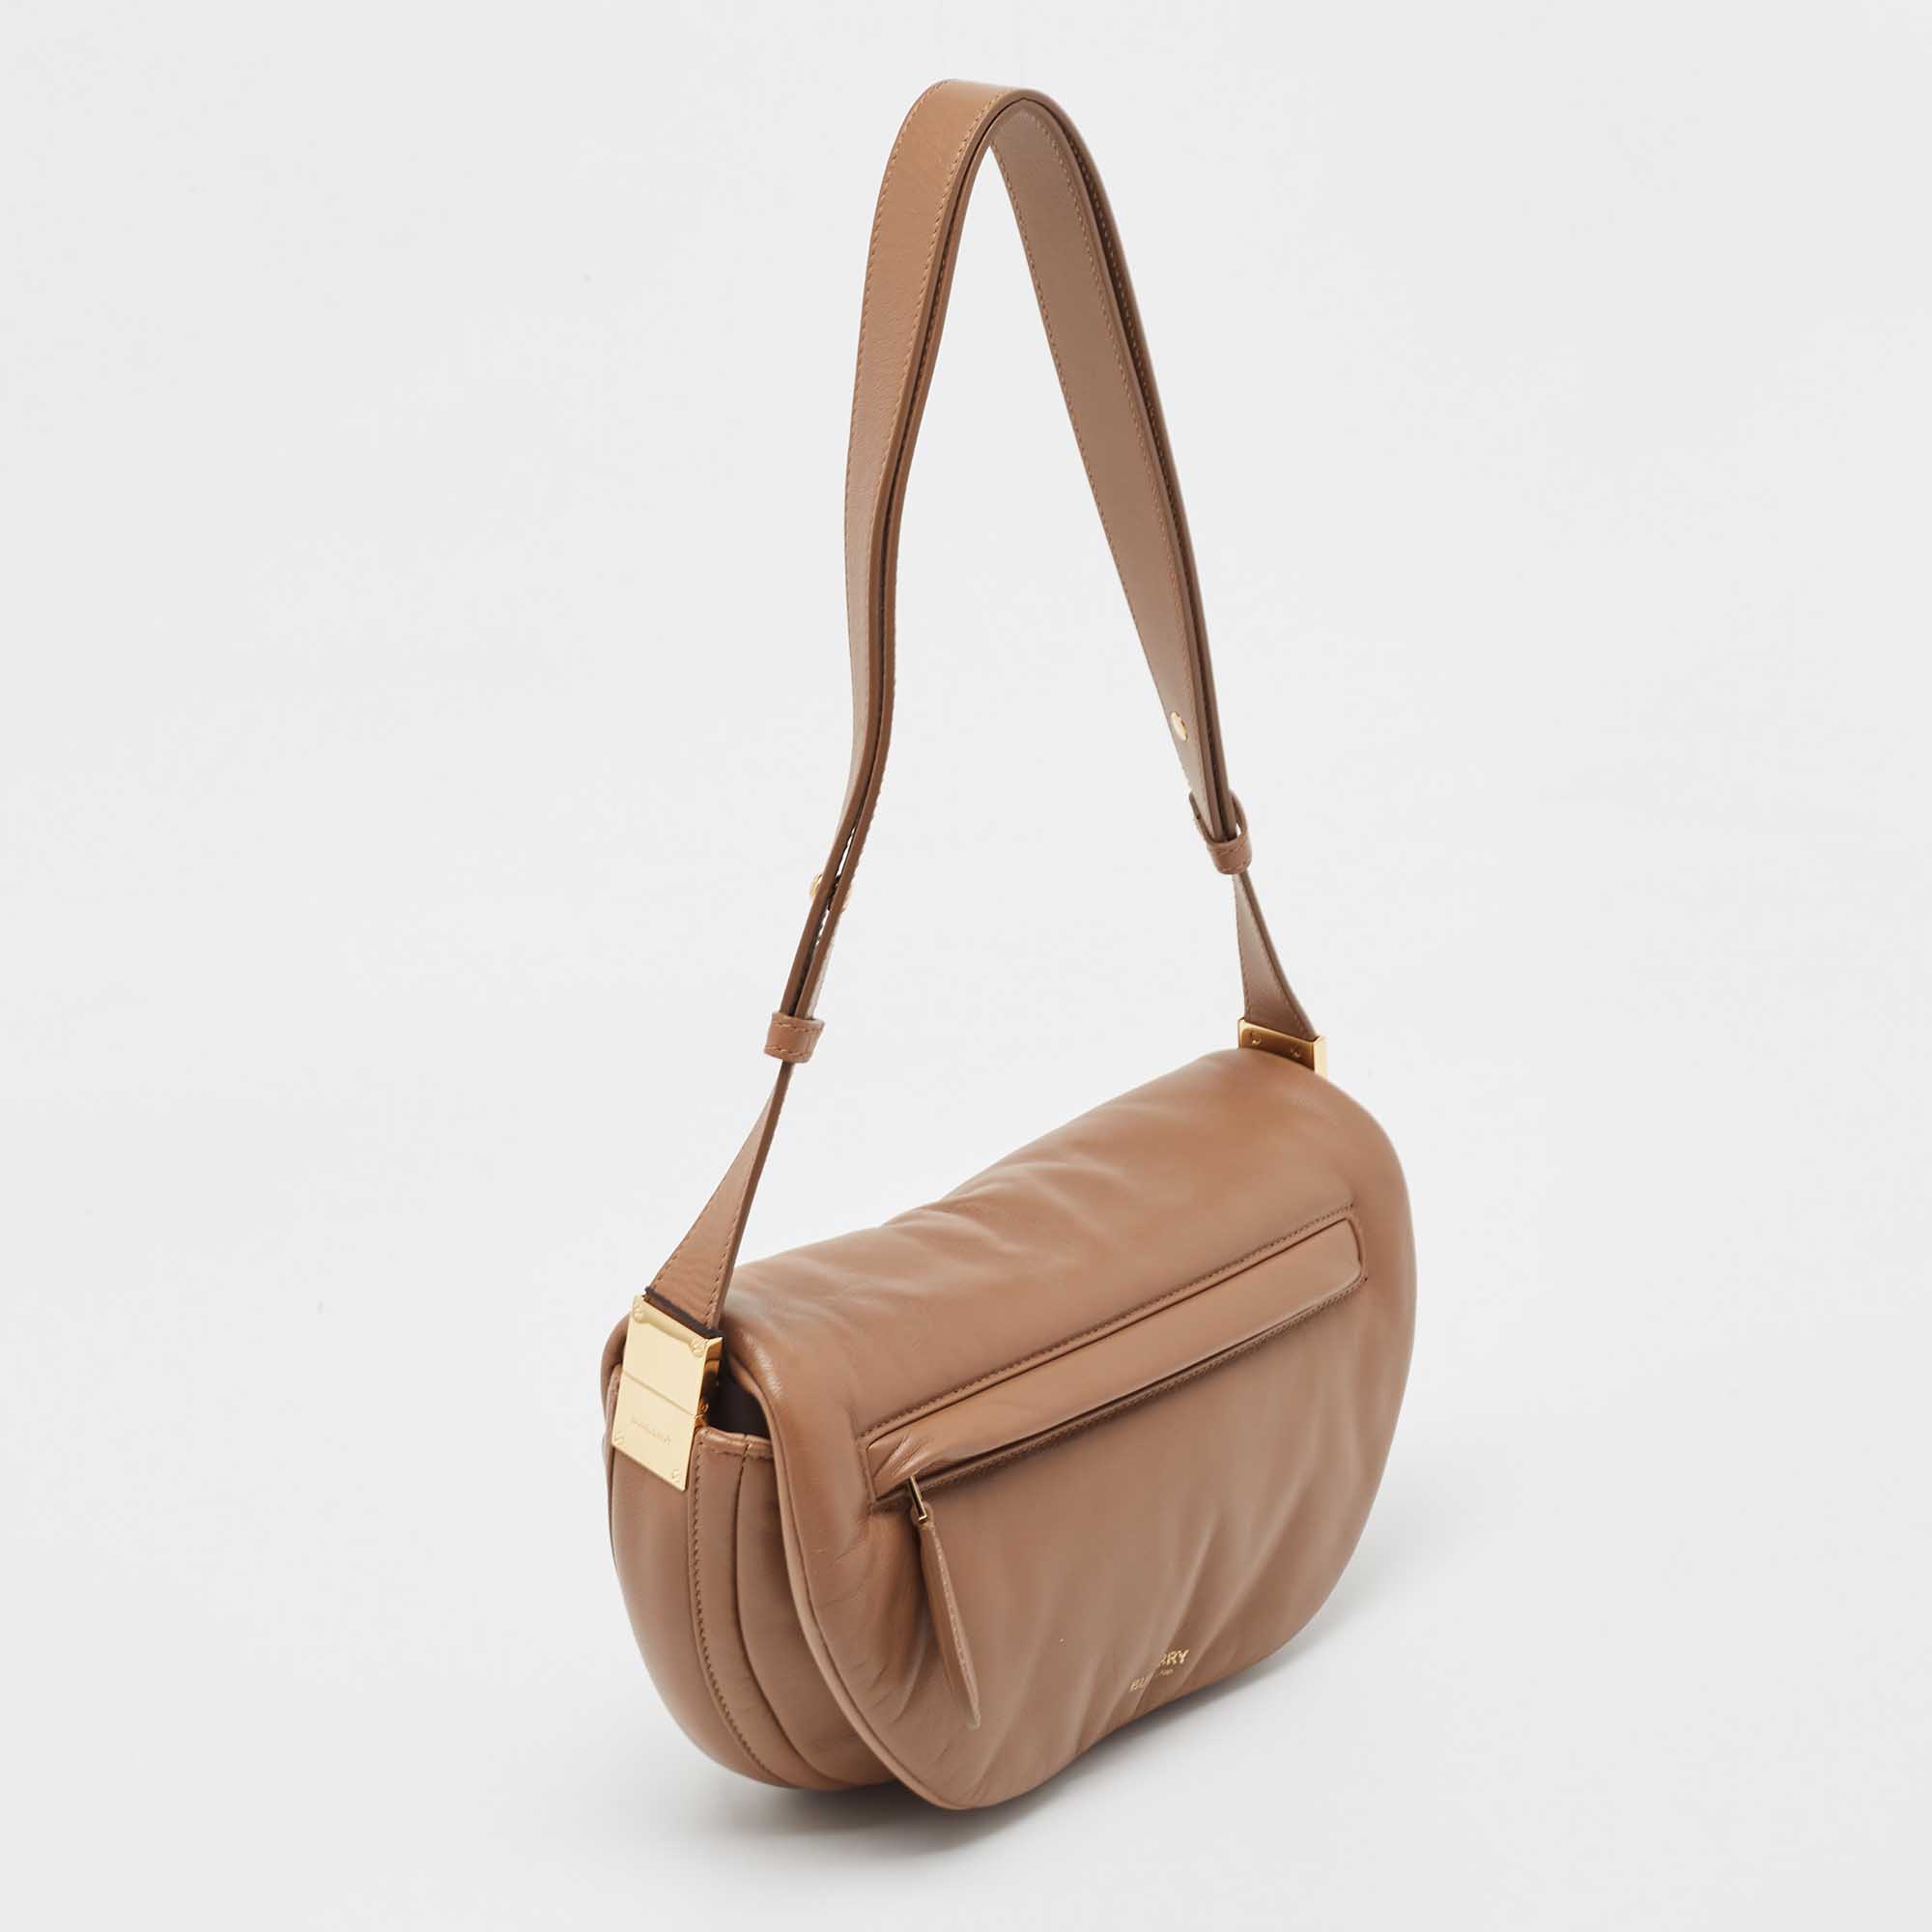 Burberry Brown Leather Small Olympia Shoulder Bag